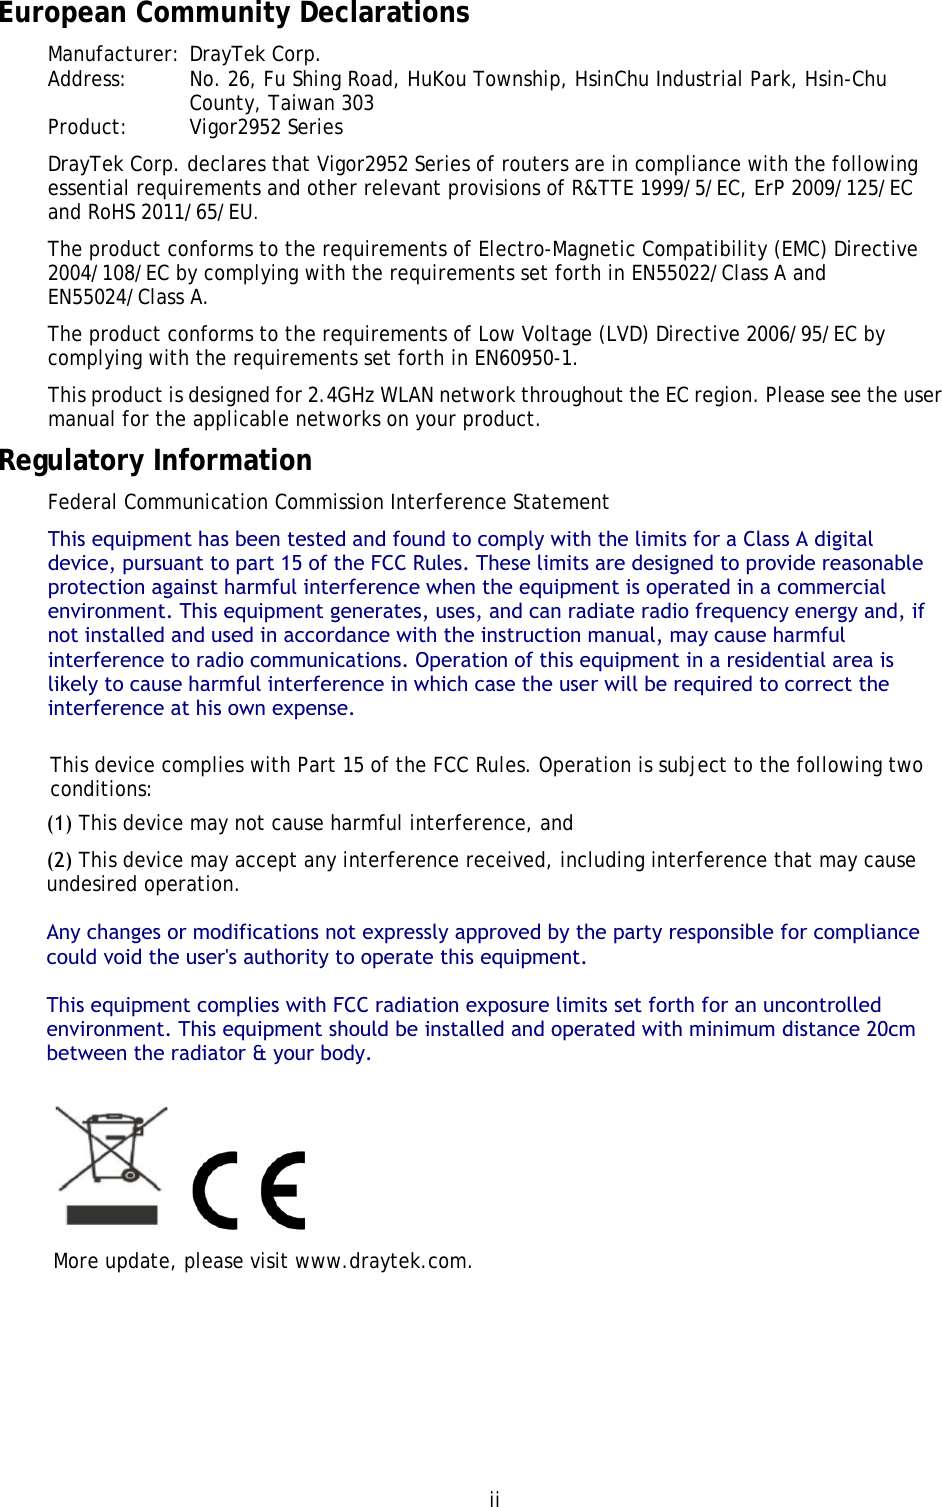 ii European Community Declarations Manufacturer: DrayTek Corp. Address:  No. 26, Fu Shing Road, HuKou Township, HsinChu Industrial Park, Hsin-Chu County, Taiwan 303 Product:   Vigor2952 Series DrayTek Corp. declares that Vigor2952 Series of routers are in compliance with the following essential requirements and other relevant provisions of R&amp;TTE 1999/5/EC, ErP 2009/125/EC and RoHS 2011/65/EU. The product conforms to the requirements of Electro-Magnetic Compatibility (EMC) Directive 2004/108/EC by complying with the requirements set forth in EN55022/Class A and EN55024/Class A.   The product conforms to the requirements of Low Voltage (LVD) Directive 2006/95/EC by complying with the requirements set forth in EN60950-1. This product is designed for 2.4GHz WLAN network throughout the EC region. Please see the user manual for the applicable networks on your product. Regulatory Information Federal Communication Commission Interference Statement This equipment has been tested and found to comply with the limits for a Class A digital device, pursuant to part 15 of the FCC Rules. These limits are designed to provide reasonable protection against harmful interference when the equipment is operated in a commercial environment. This equipment generates, uses, and can radiate radio frequency energy and, if not installed and used in accordance with the instruction manual, may cause harmful interference to radio communications. Operation of this equipment in a residential area is likely to cause harmful interference in which case the user will be required to correct the interference at his own expense.This device complies with Part 15 of the FCC Rules. Operation is subject to the following two conditions: (1) This device may not cause harmful interference, and(2) This device may accept any interference received, including interference that may cause undesired operation.Any changes or modifications not expressly approved by the party responsible for compliance could void the user&apos;s authority to operate this equipment.This equipment complies with FCC radiation exposure limits set forth for an uncontrolled environment. This equipment should be installed and operated with minimum distance 20cm between the radiator &amp; your body. More update, please visit www.draytek.com. 